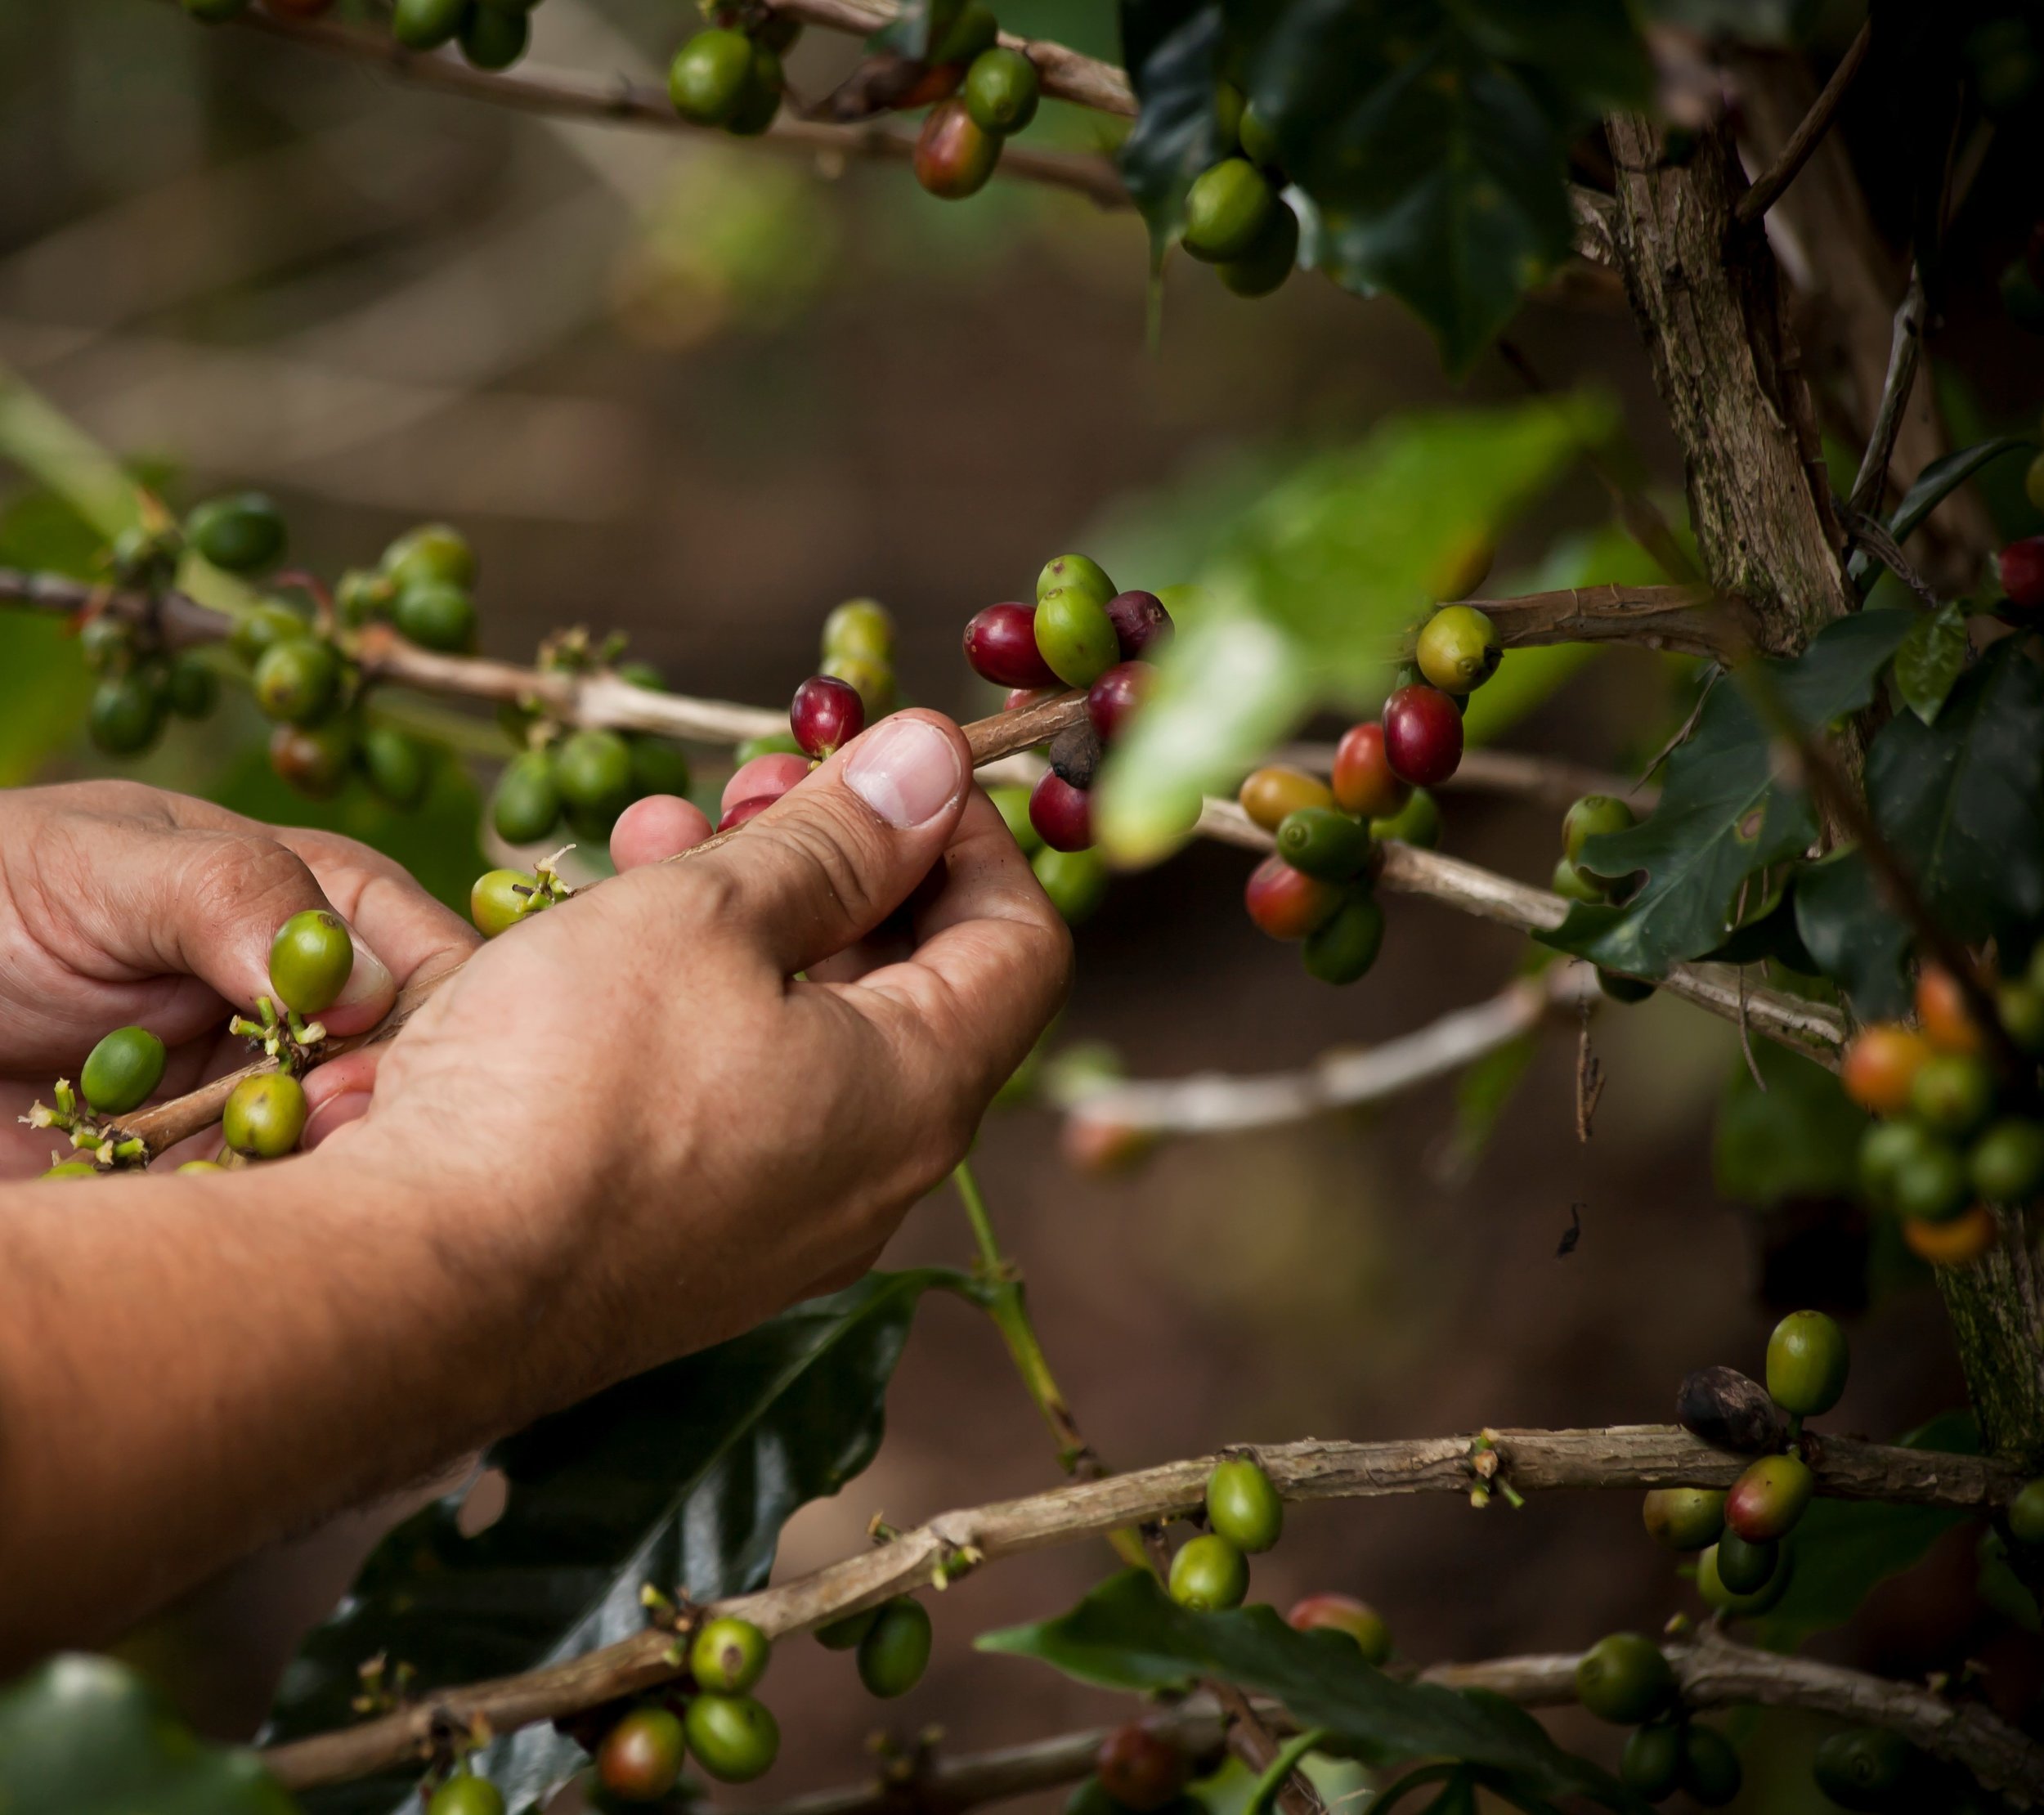 Global Coffee Platform and SAFE alliance - The GCP and Hivos/SAFE have agreed to work together to address some of the main sustainability issues in Latin American coffee producing countries.